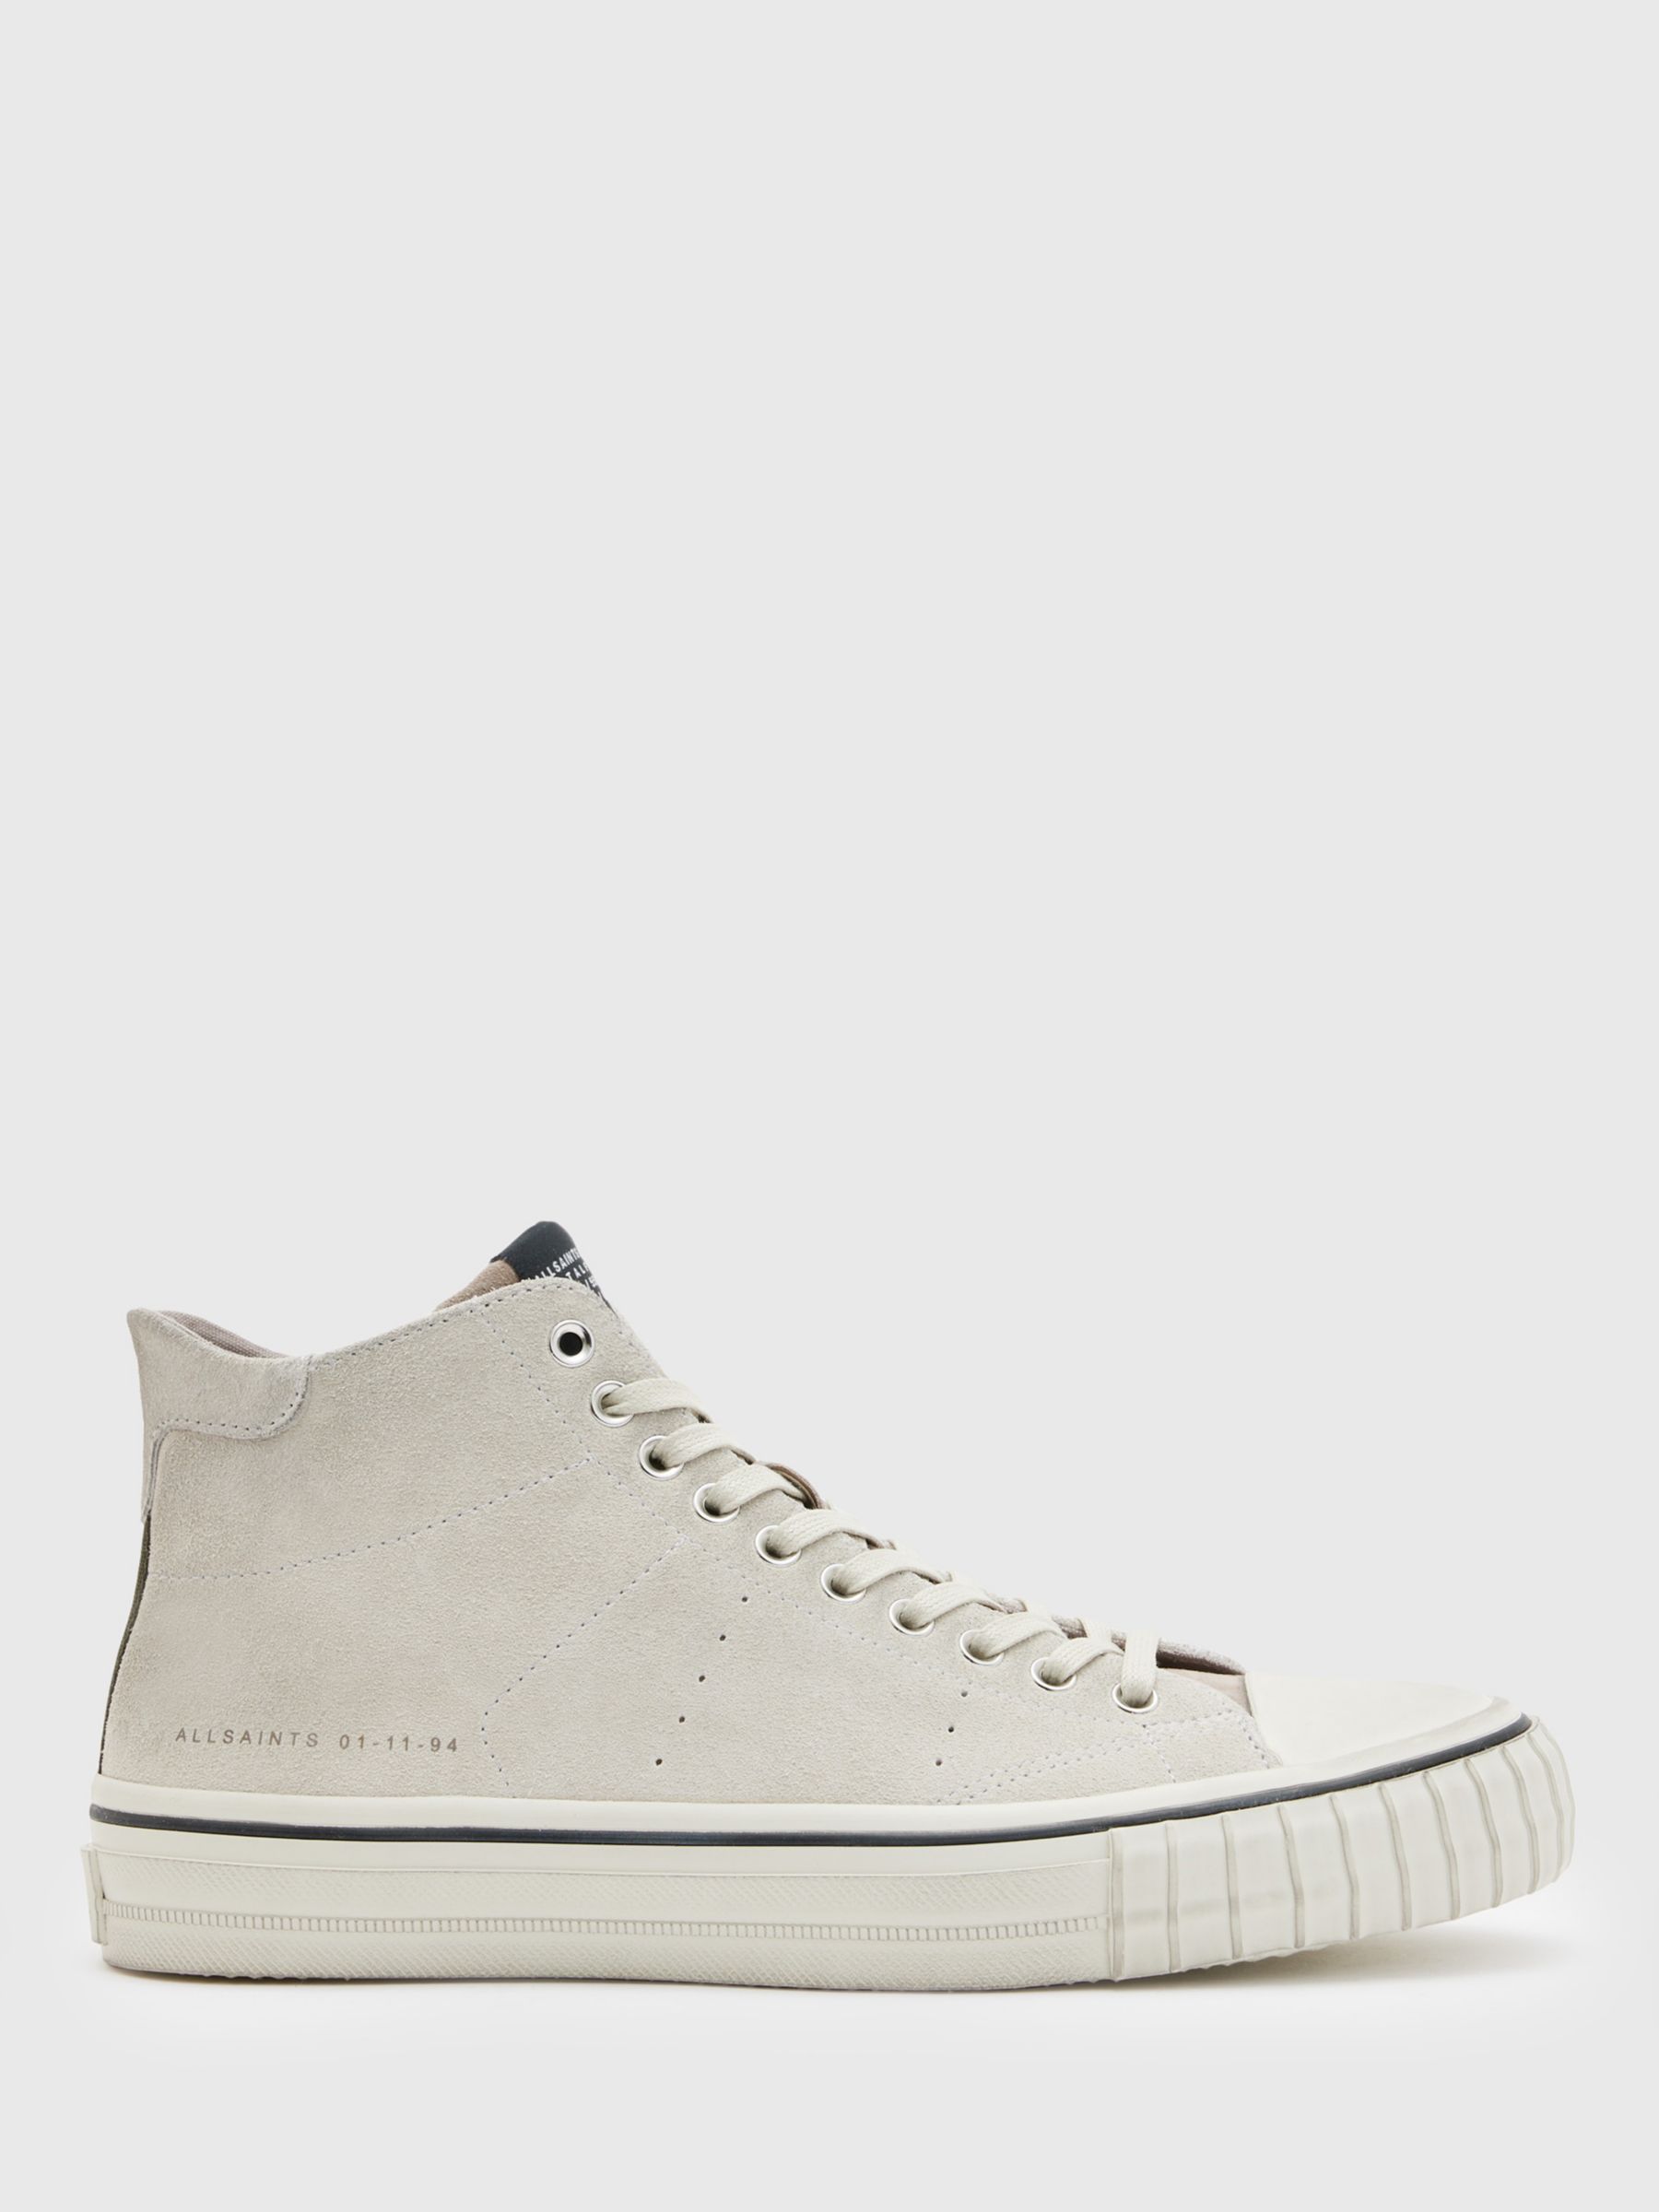 AllSaints Lewis Leather High Top Trainers, Chalk White, 10